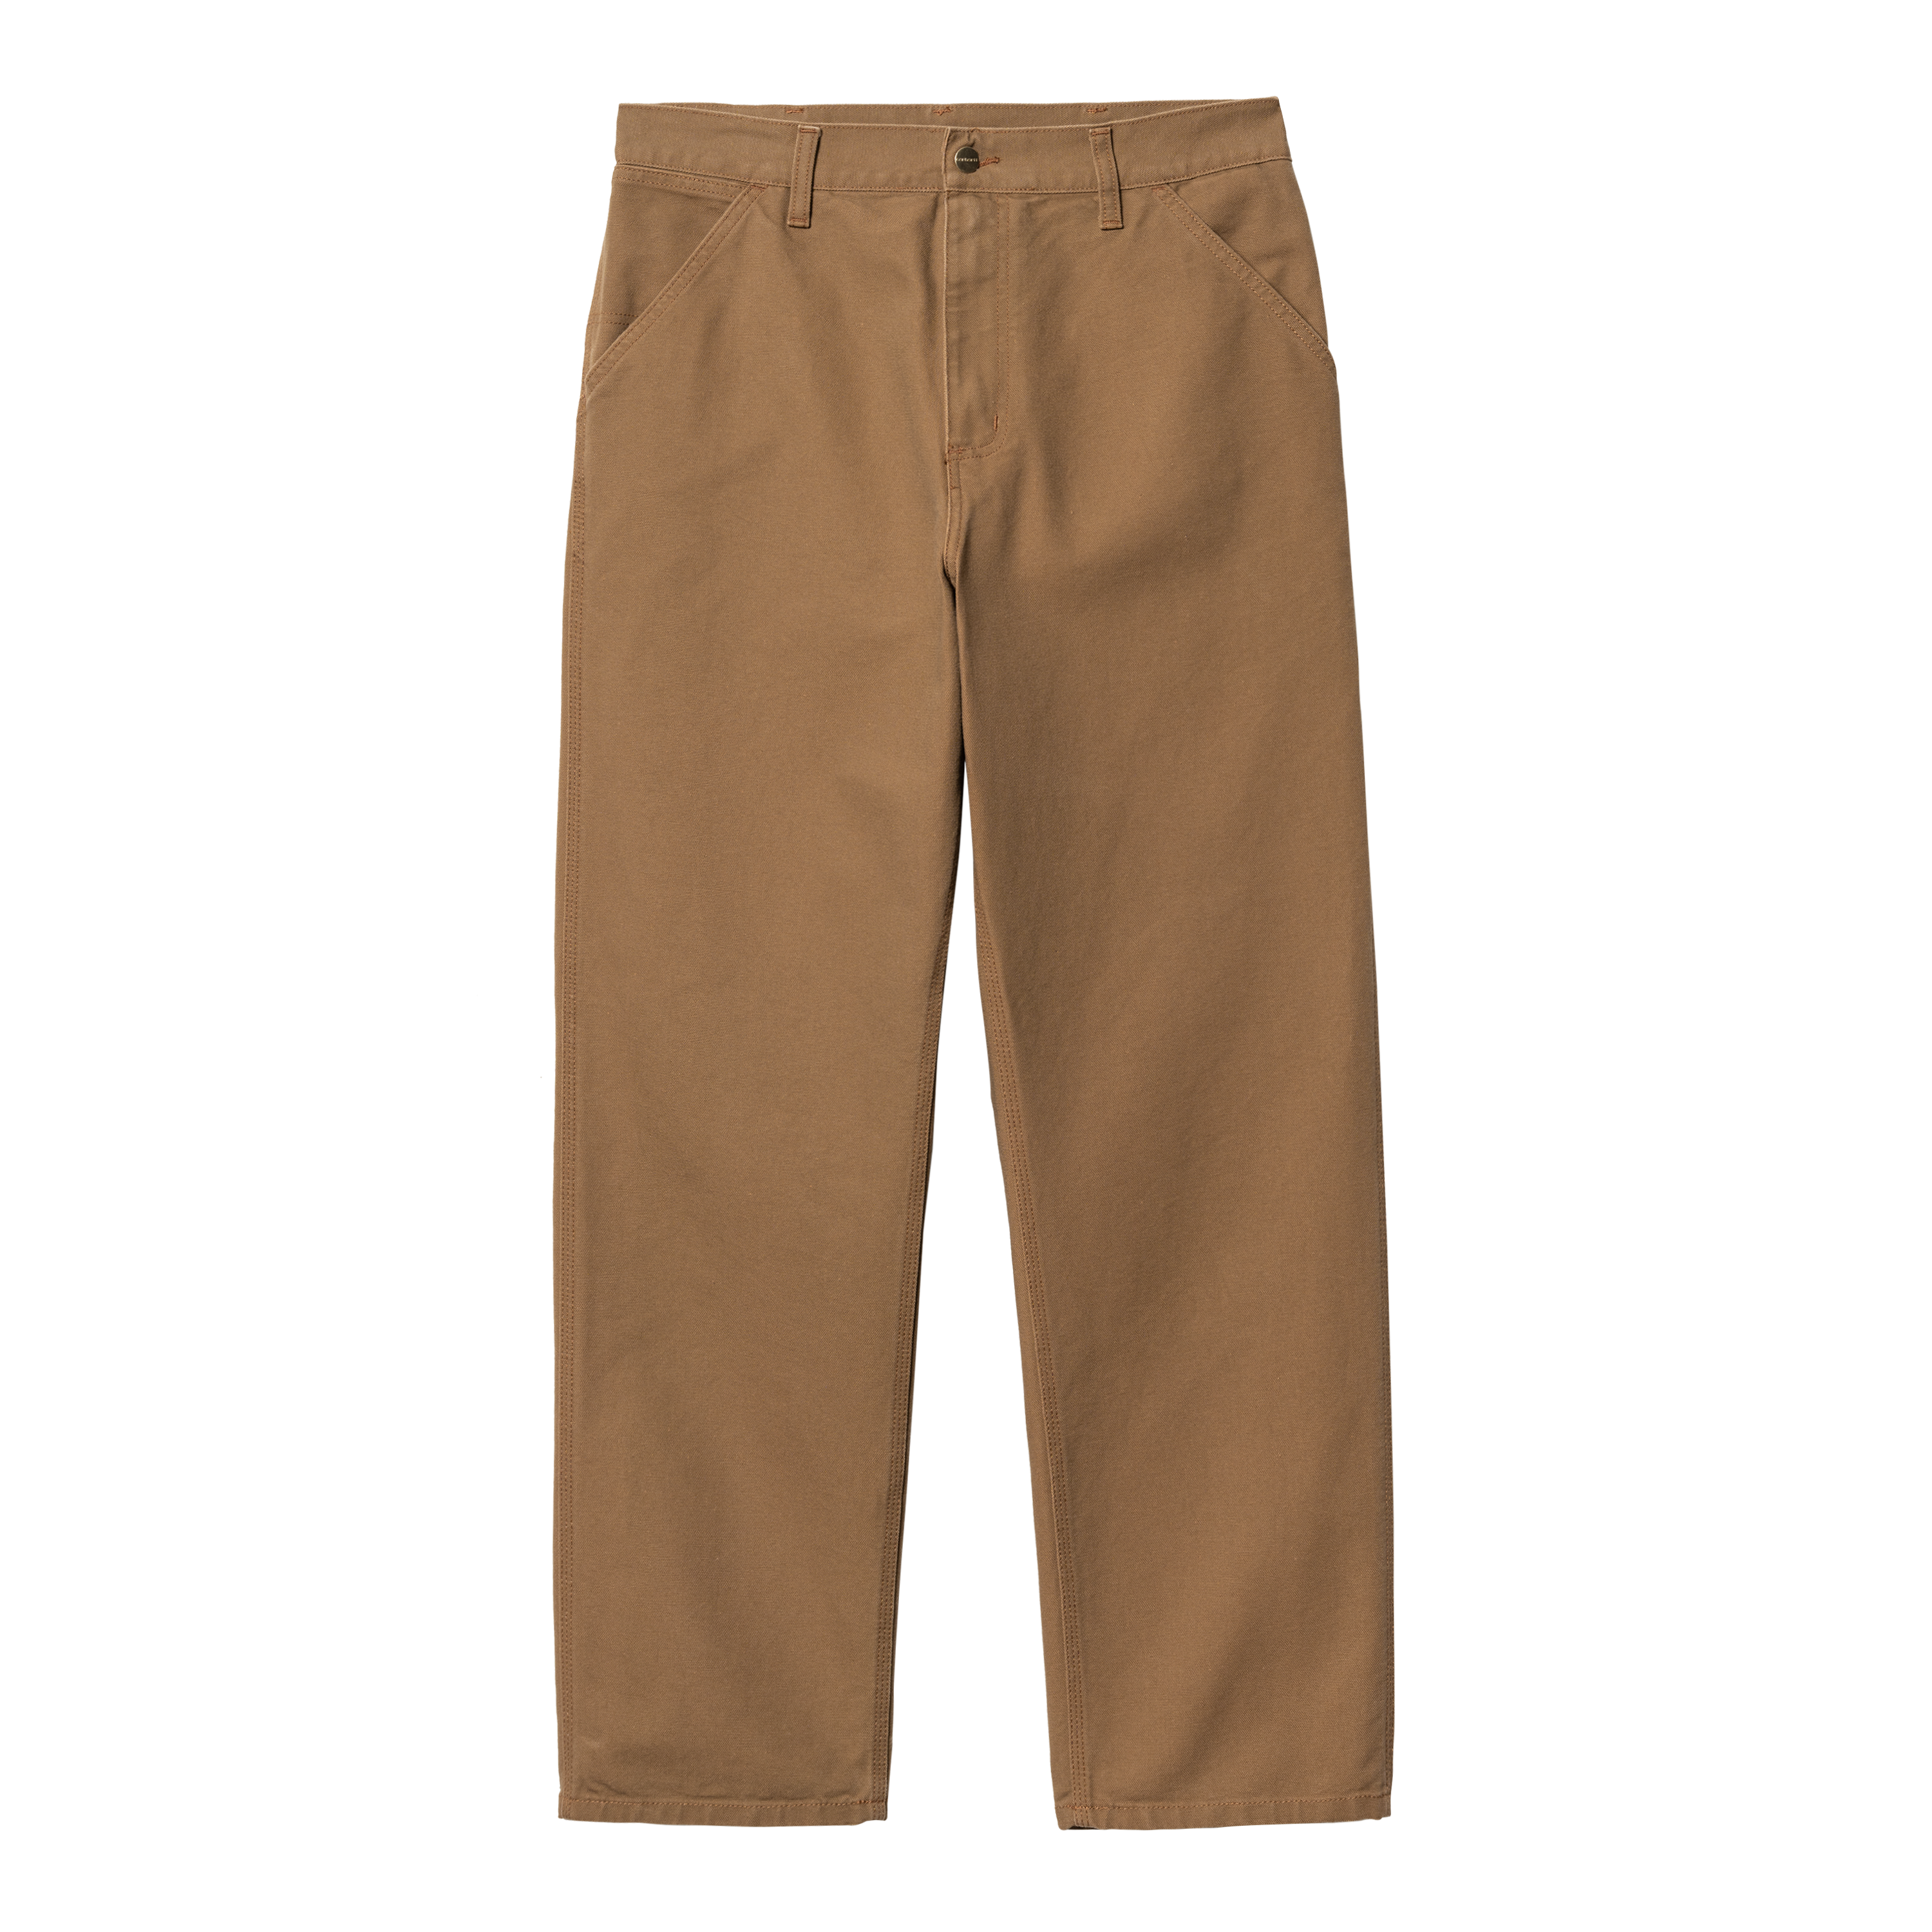 Norse Store  Shipping Worldwide - Carhartt WIP Simple Pant - Hamilton Brown  Rinsed